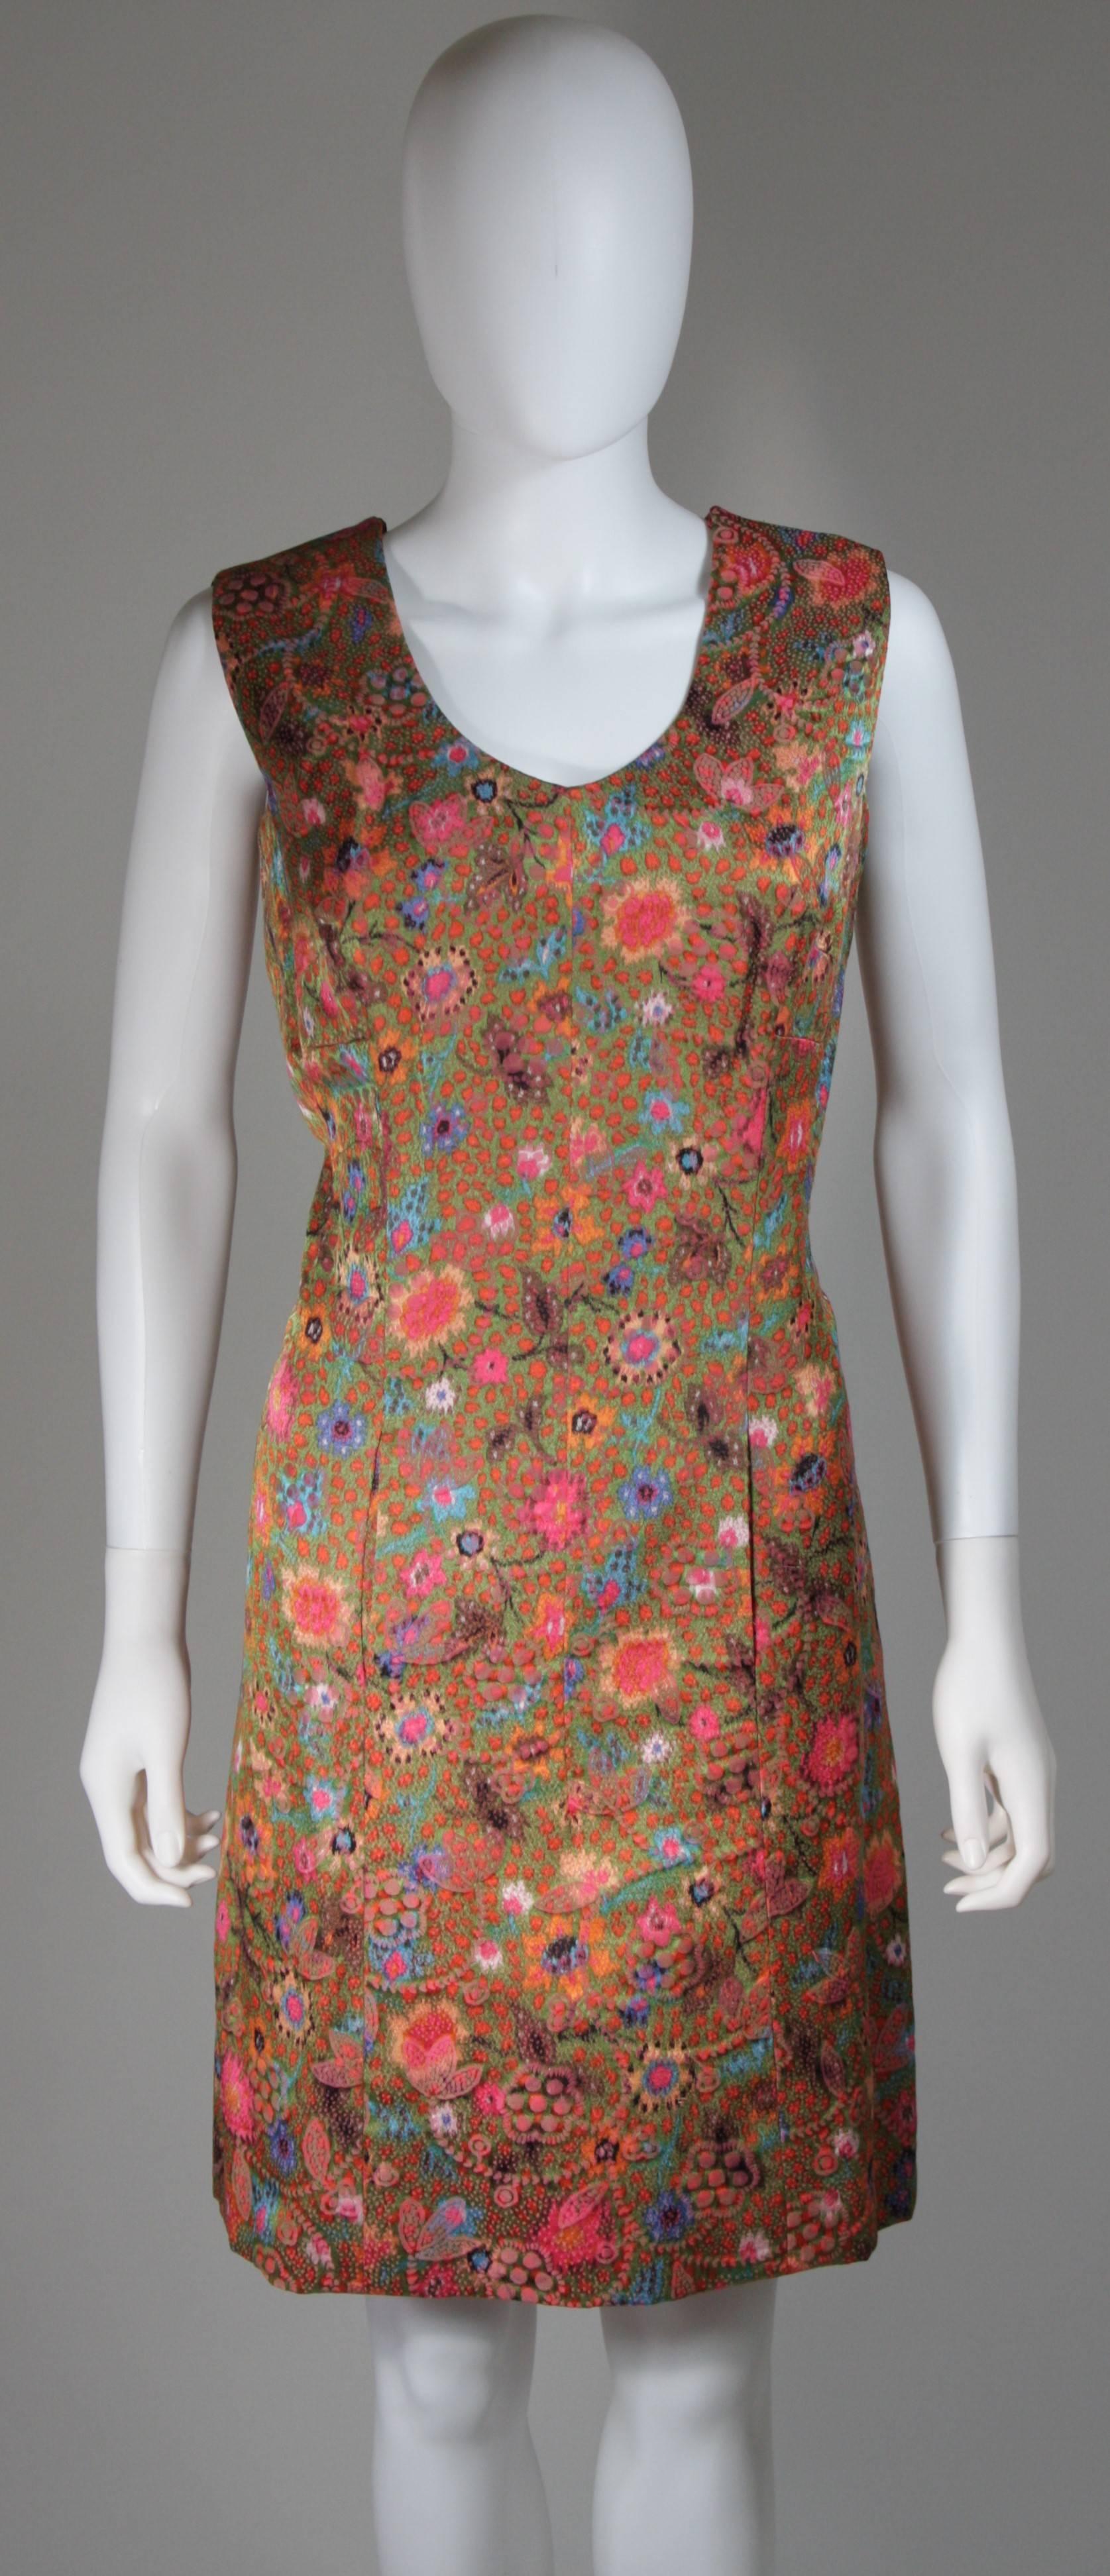 Brown Galanos Floral Print Shift Dress with Pockets Size Small Medium For Sale